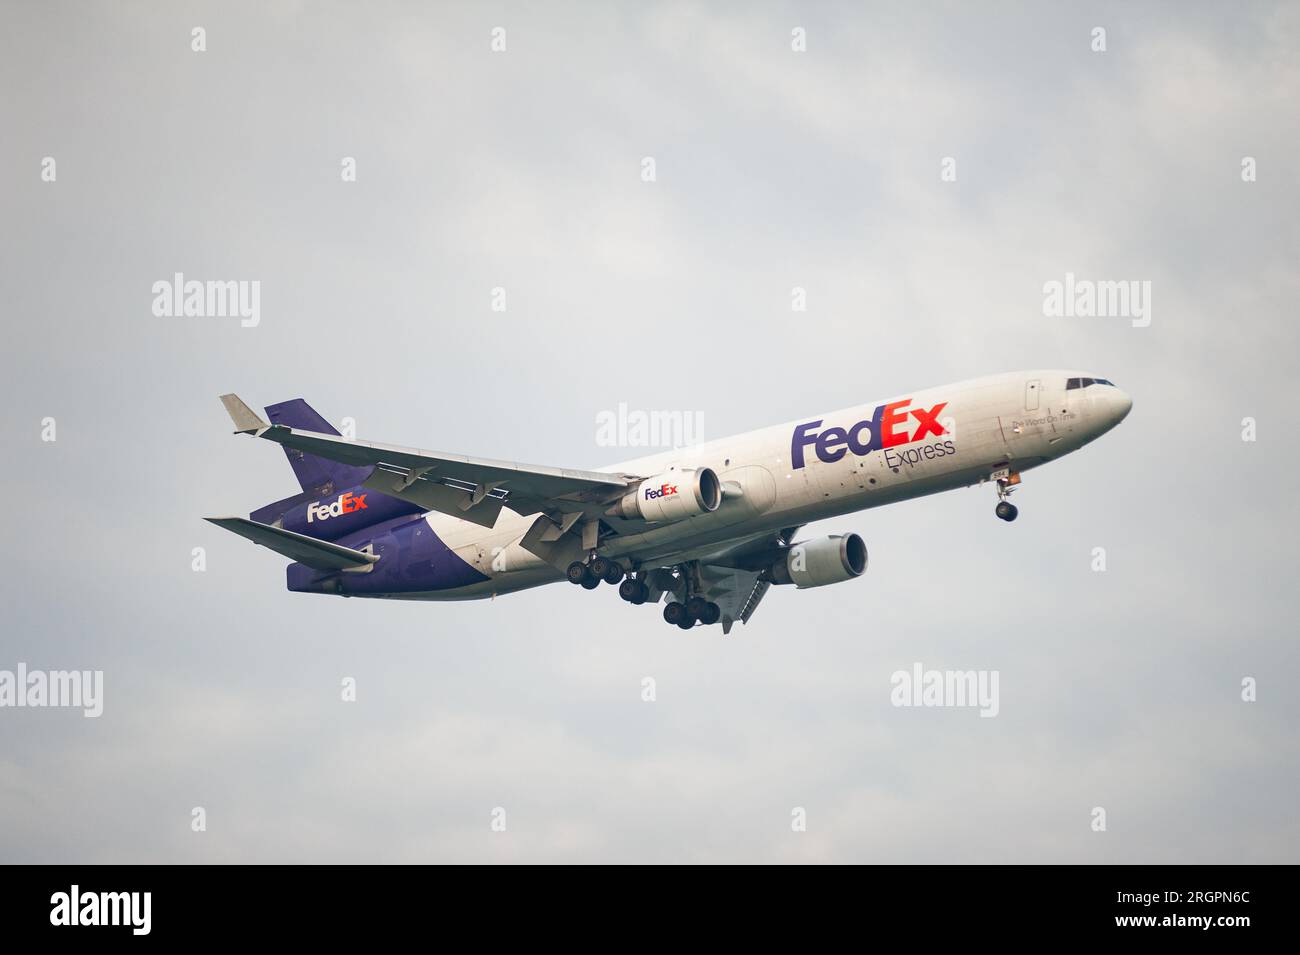 02.08.2023, Singapore, Republic of Singapore, Asia - McDonnell Douglas MD-11F freighter jet of the American airline company Federal Express (FedEx). Stock Photo